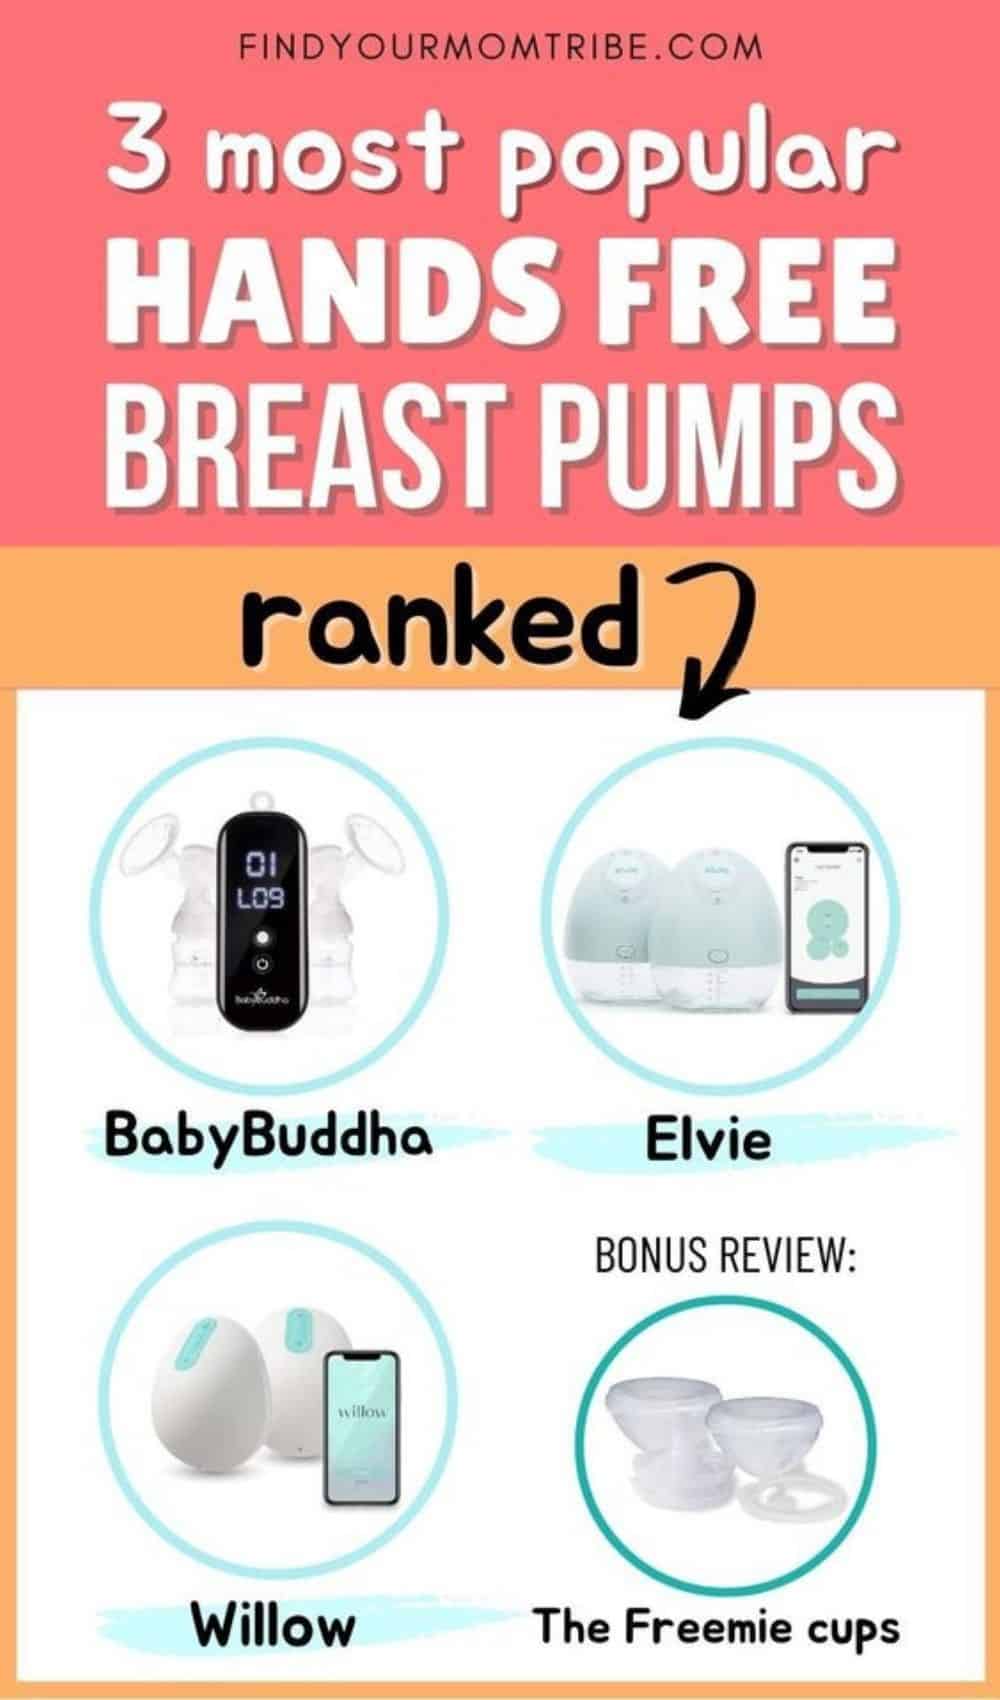 3 Hands Free Breast Pumps Ranked